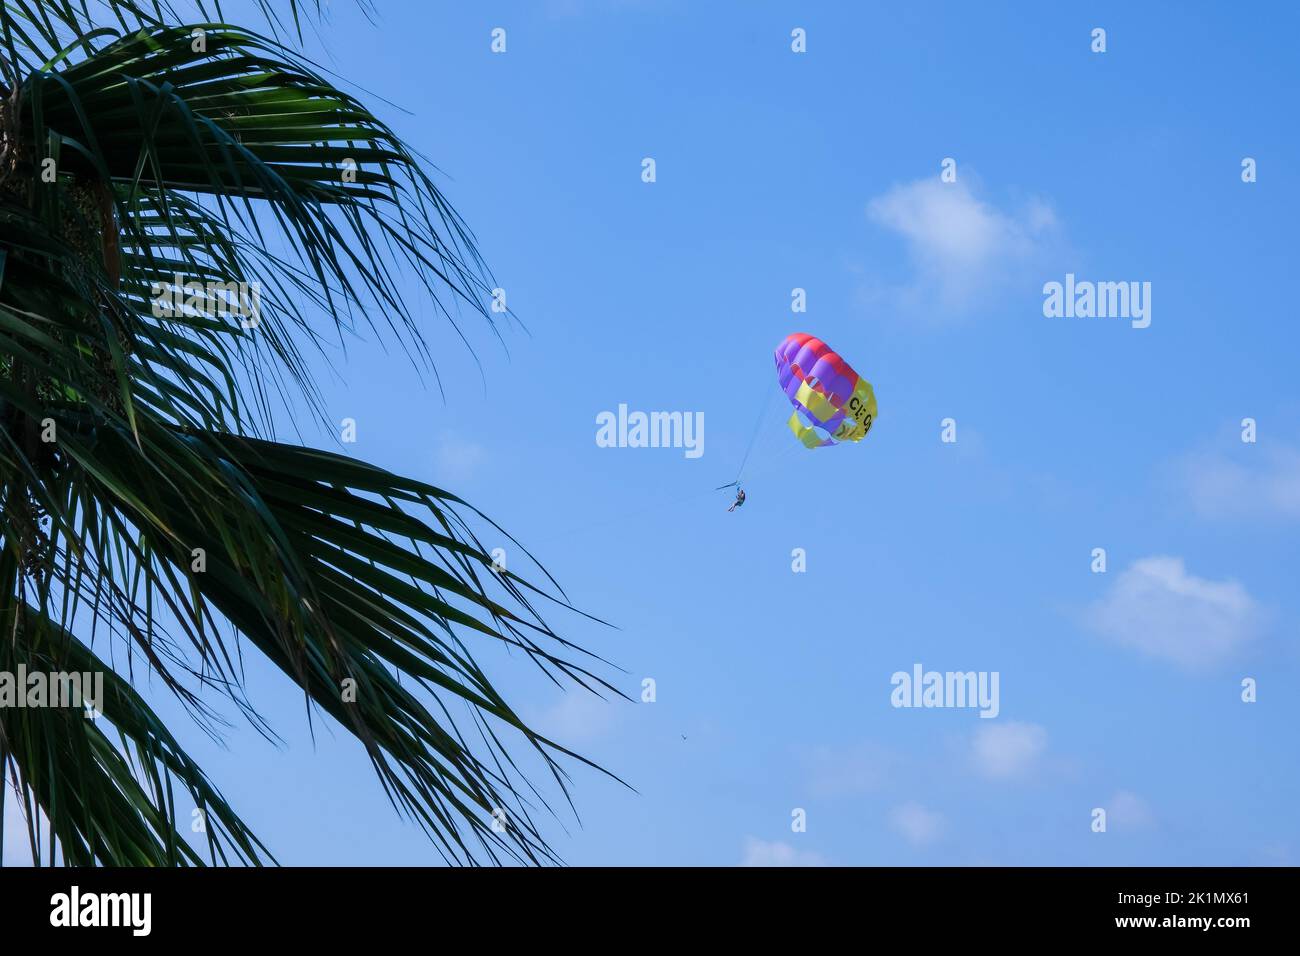 Palm tree silhouette, blue sky and parasailing in the background, copy space. Stock Photo